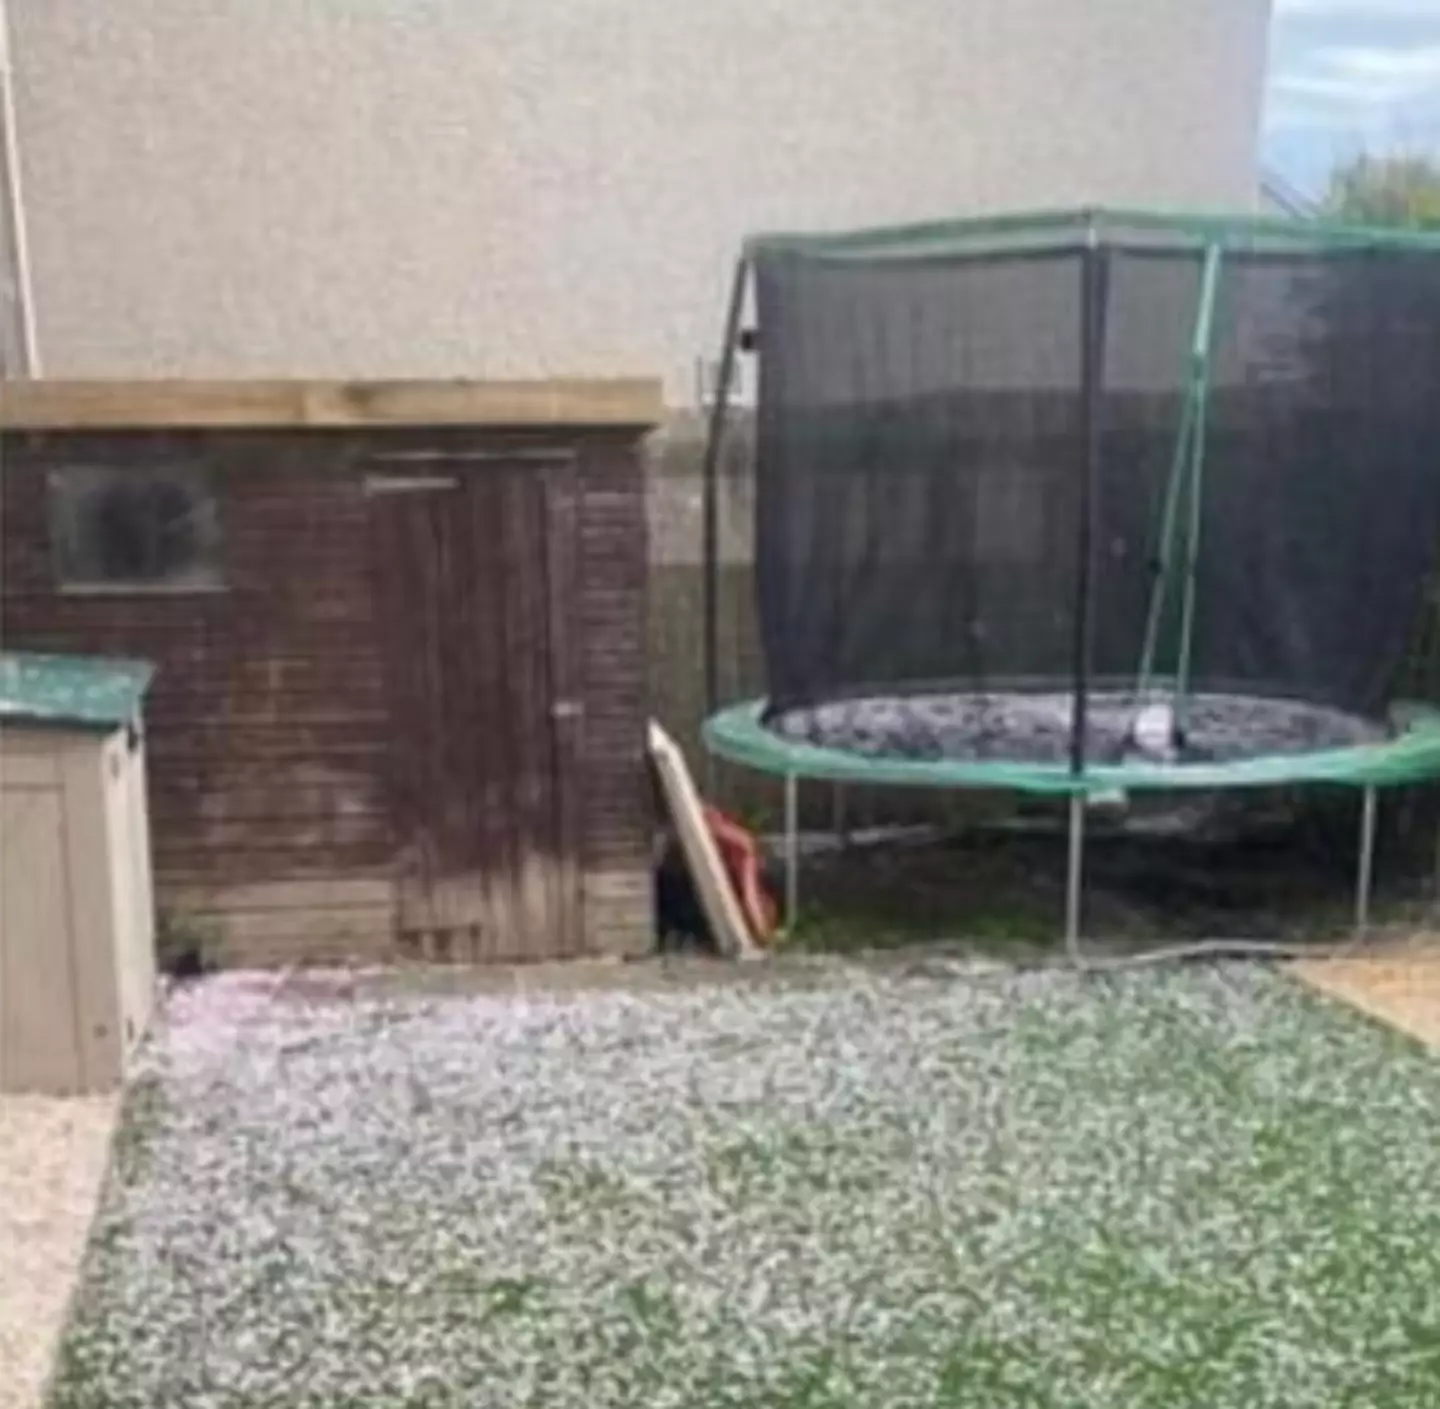 A homeowner's neighbour's blossom tree has angered her for leaving petals all over her astroturf.